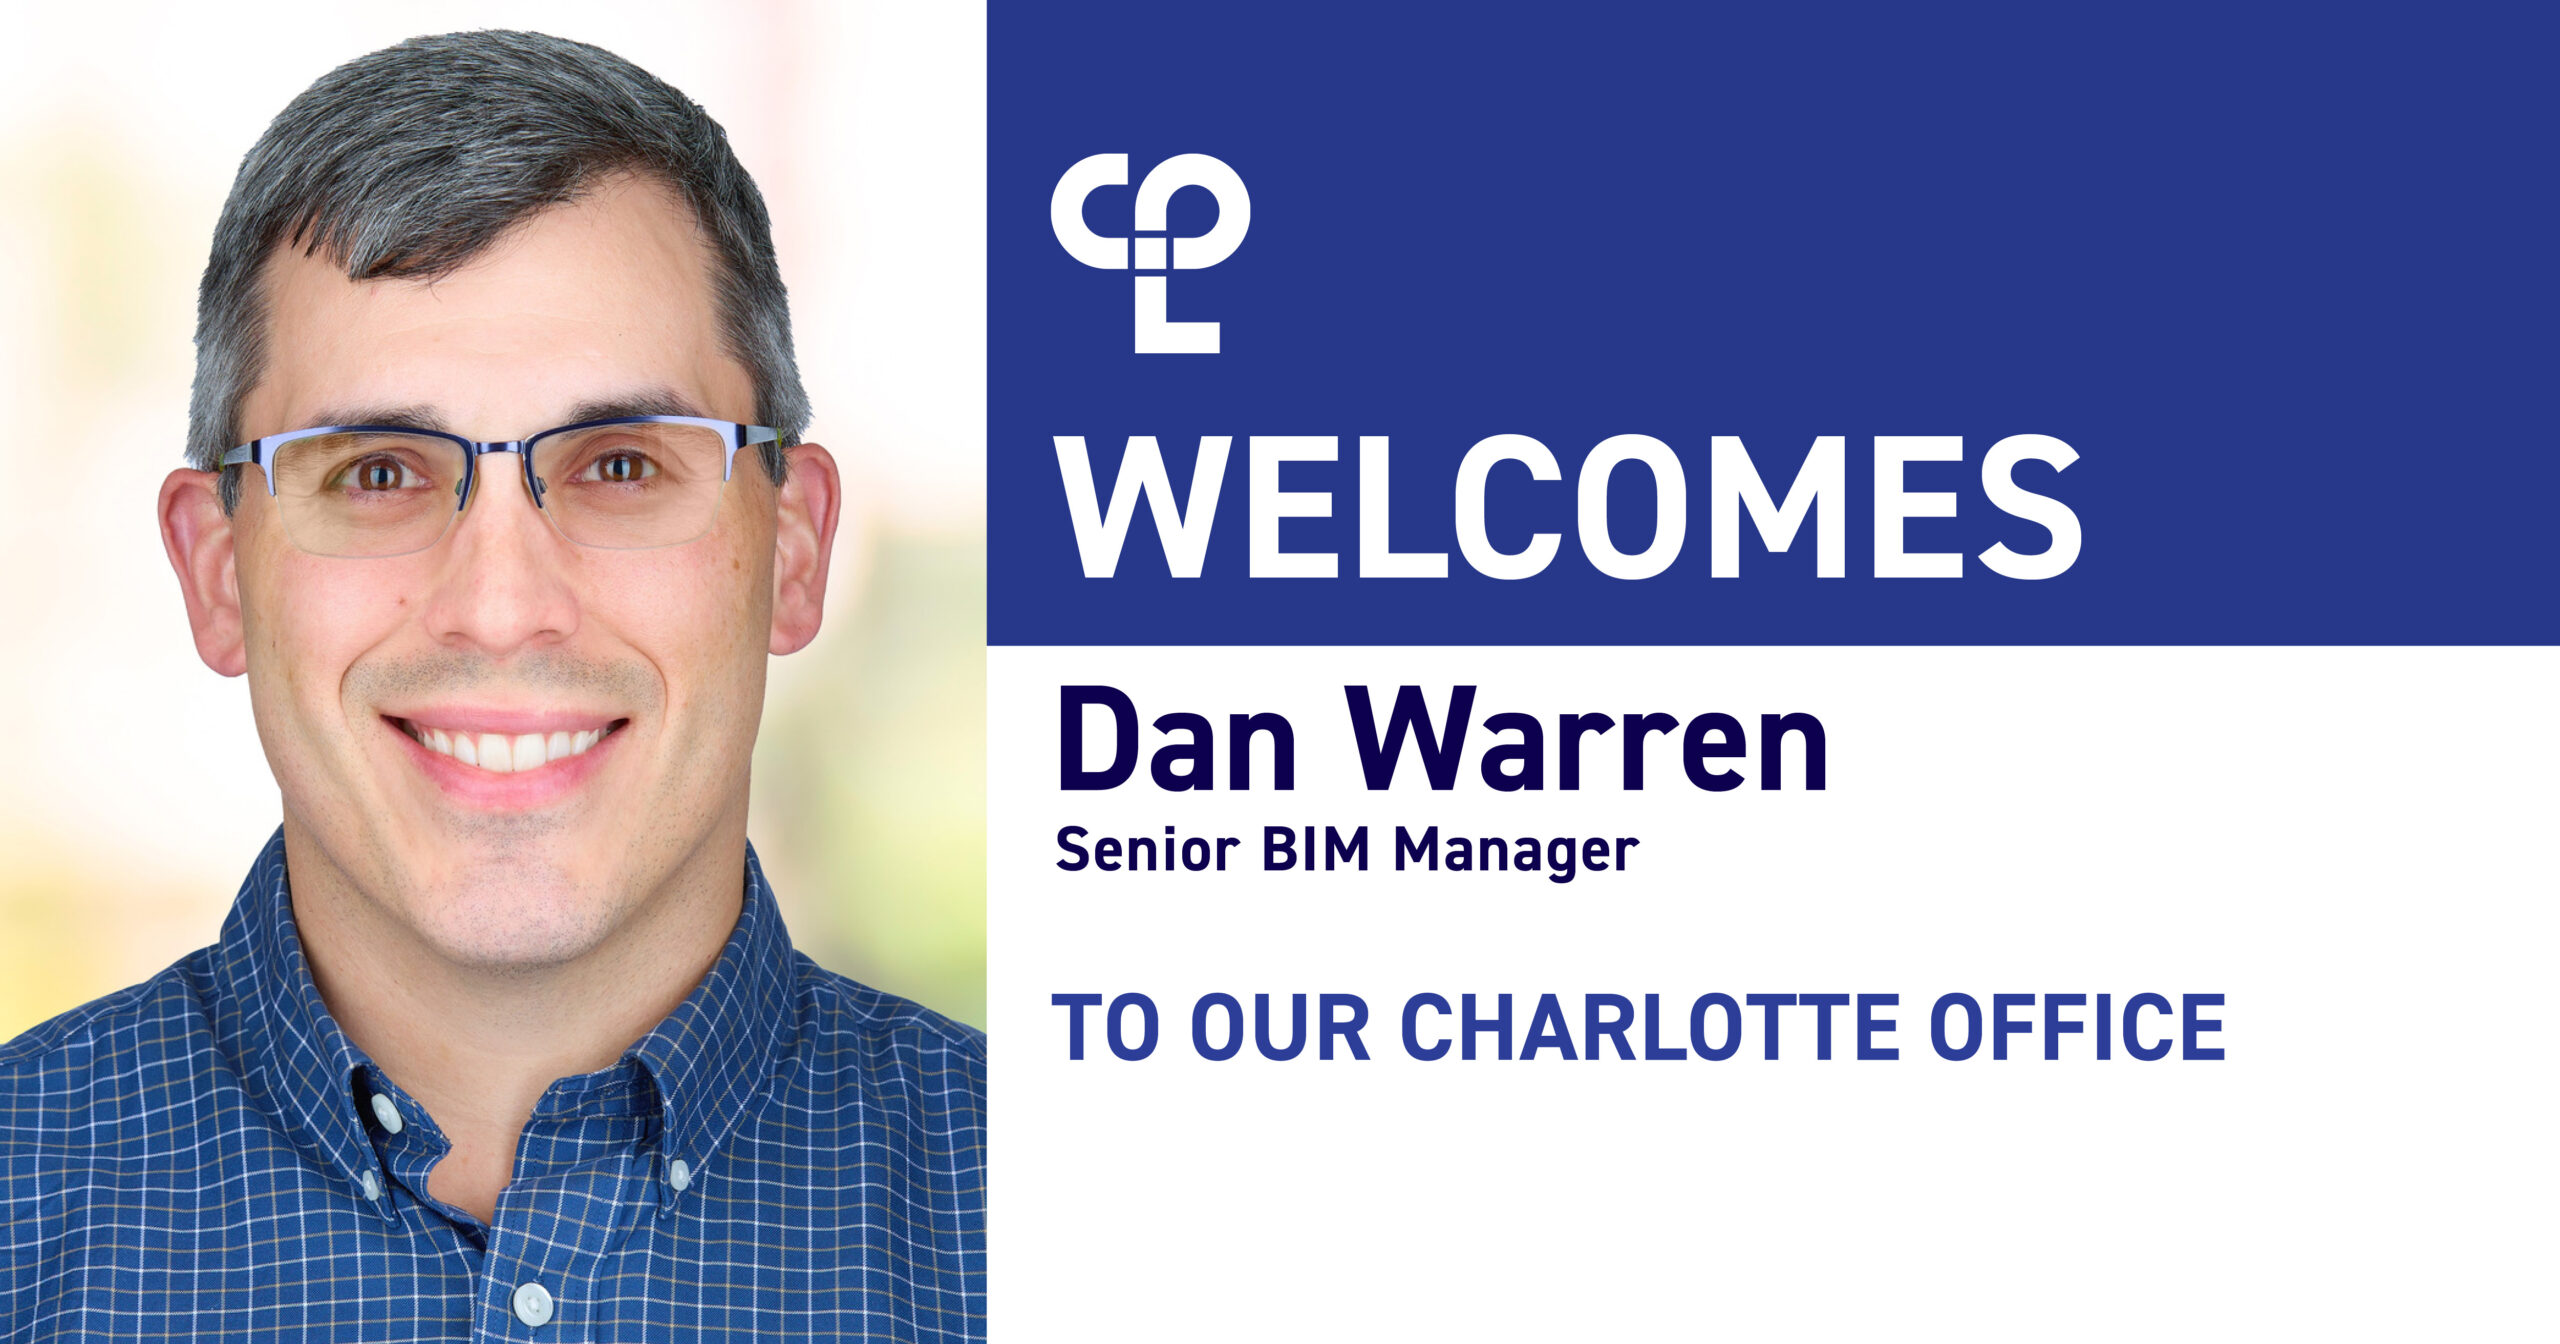 On the left is a headshot of a man with salt and pepper hair and glasses. He is smiling and wearing a blue dress shirt. On the right it reads "CPL Welcomes Dan Warren Senior BIM Manager To our Charlotte Office."